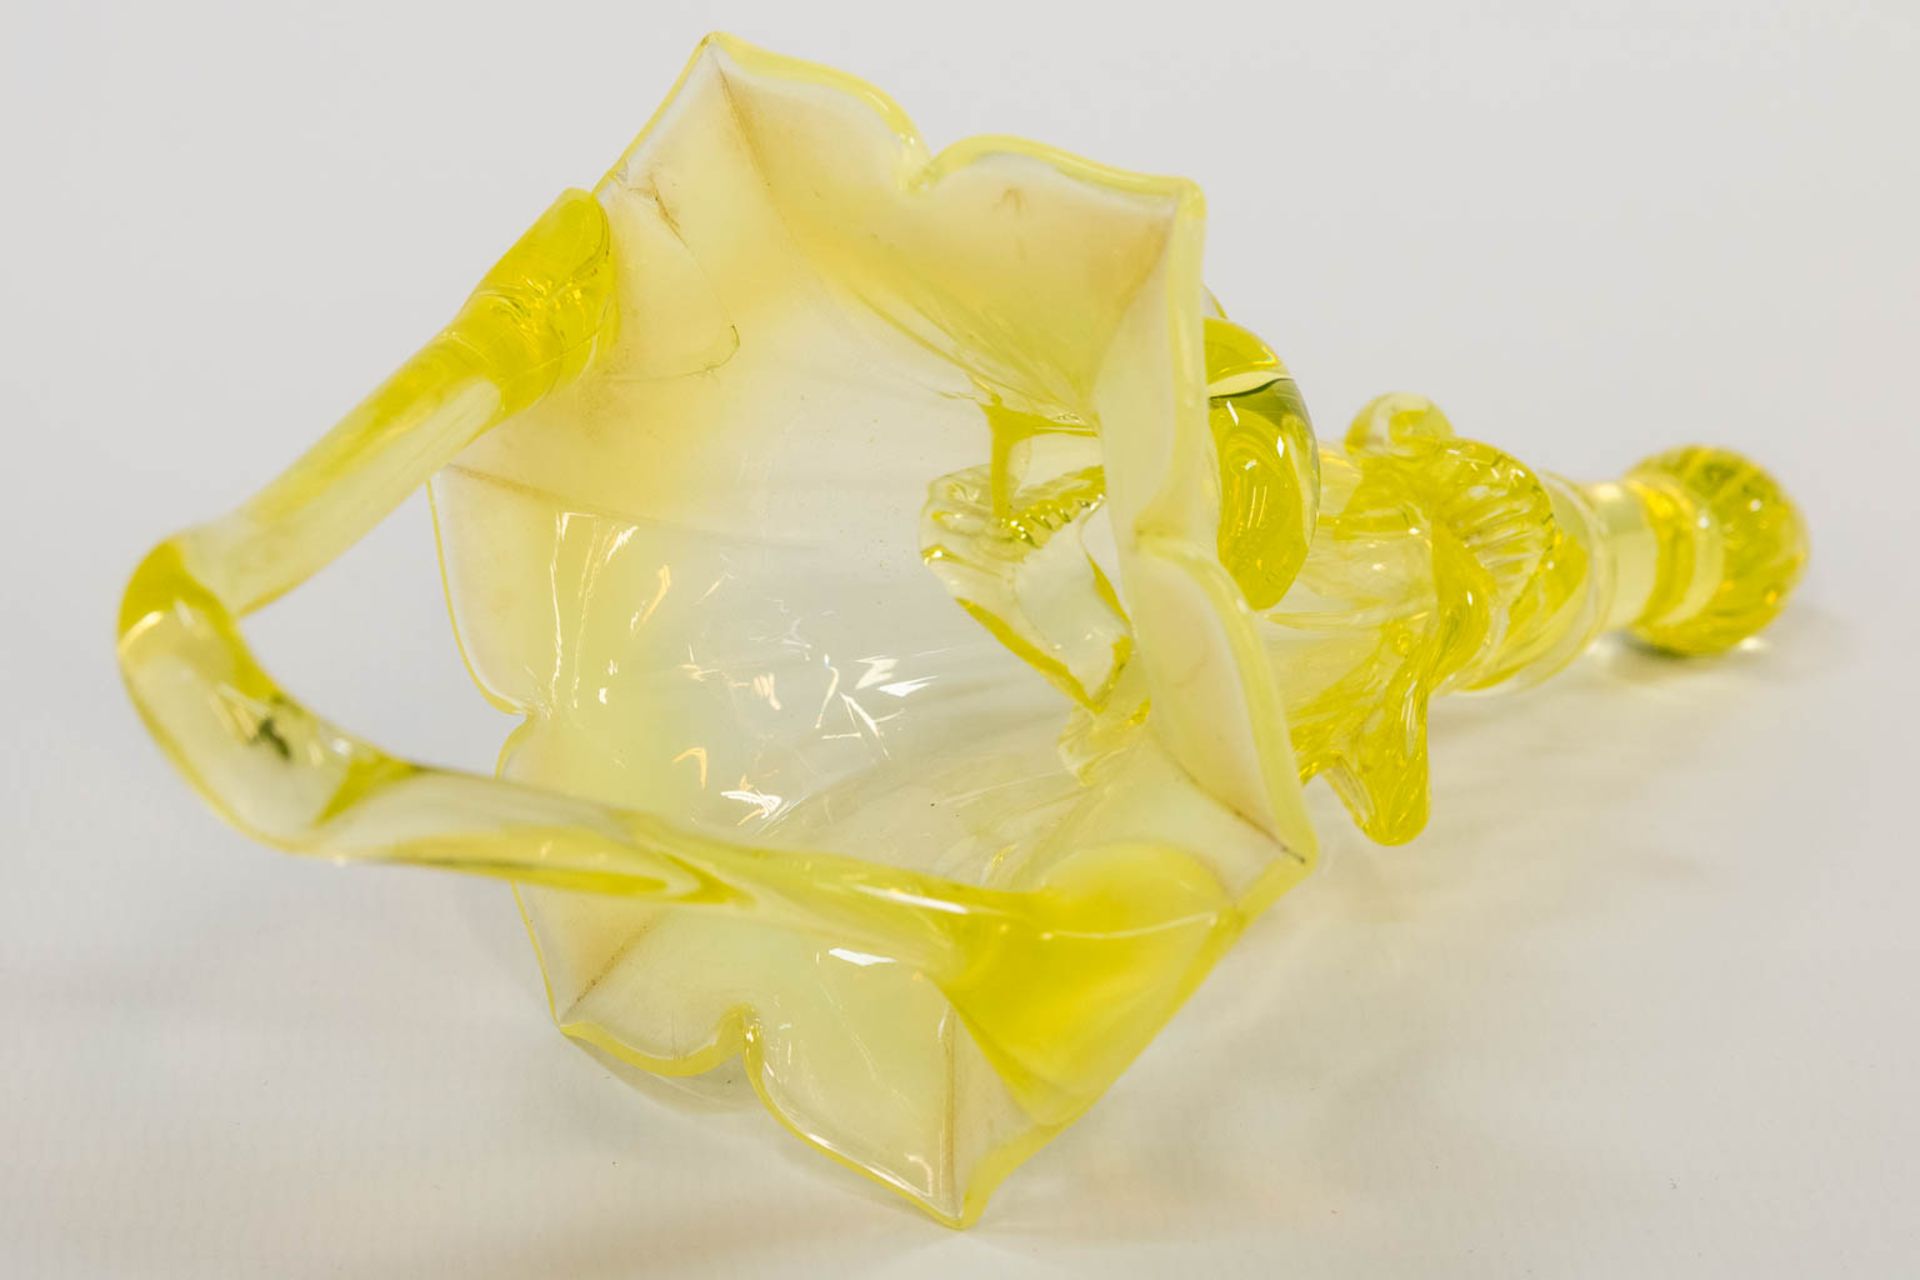 A yellow and clear glass table centrepiece pic-fleur, made in Murano, Italy. (25 x 28 x 45 cm) - Image 12 of 15